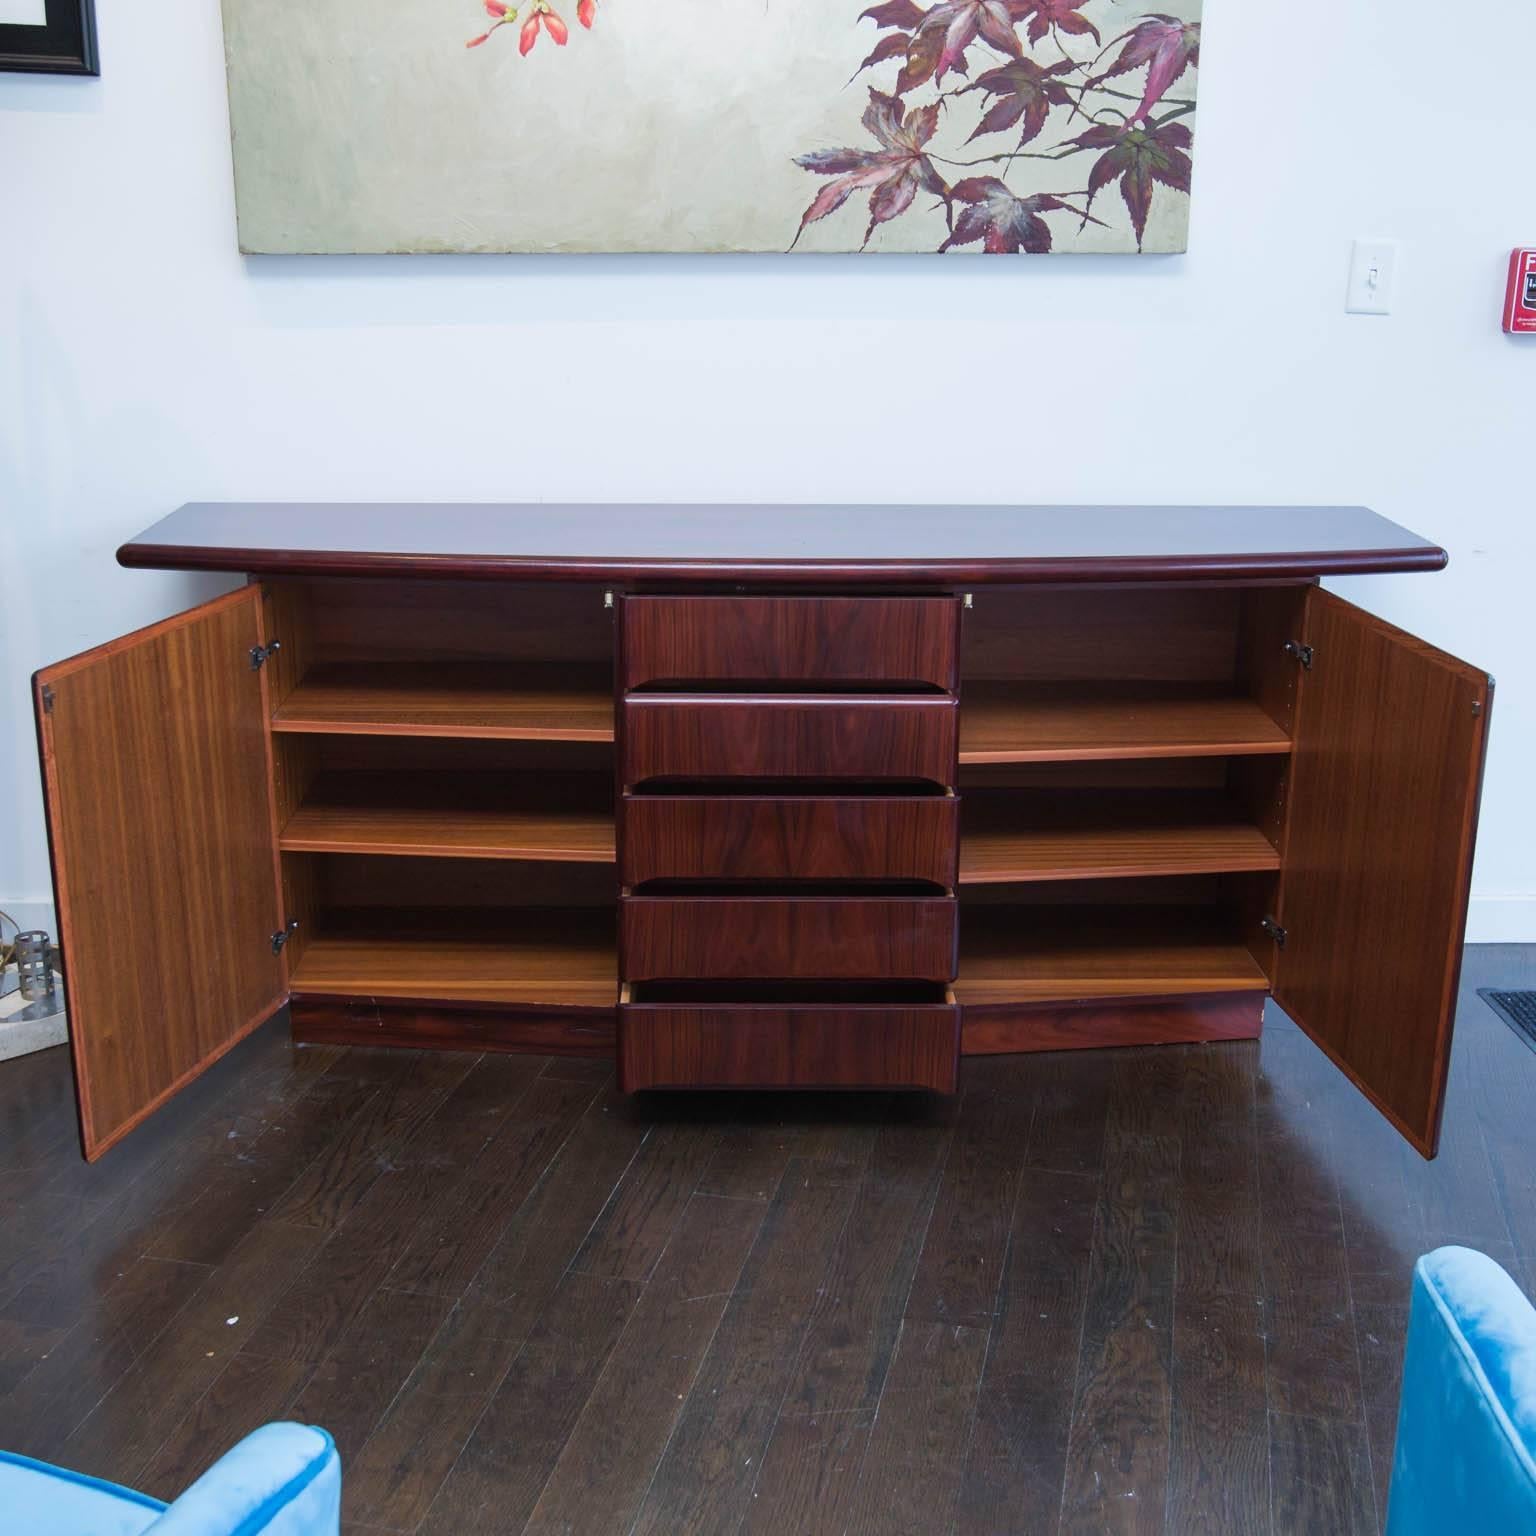 Beautiful rosewood sideboard or credenza from the late 1970s. In overall great condition with no fading or chips to the rosewood veneers.